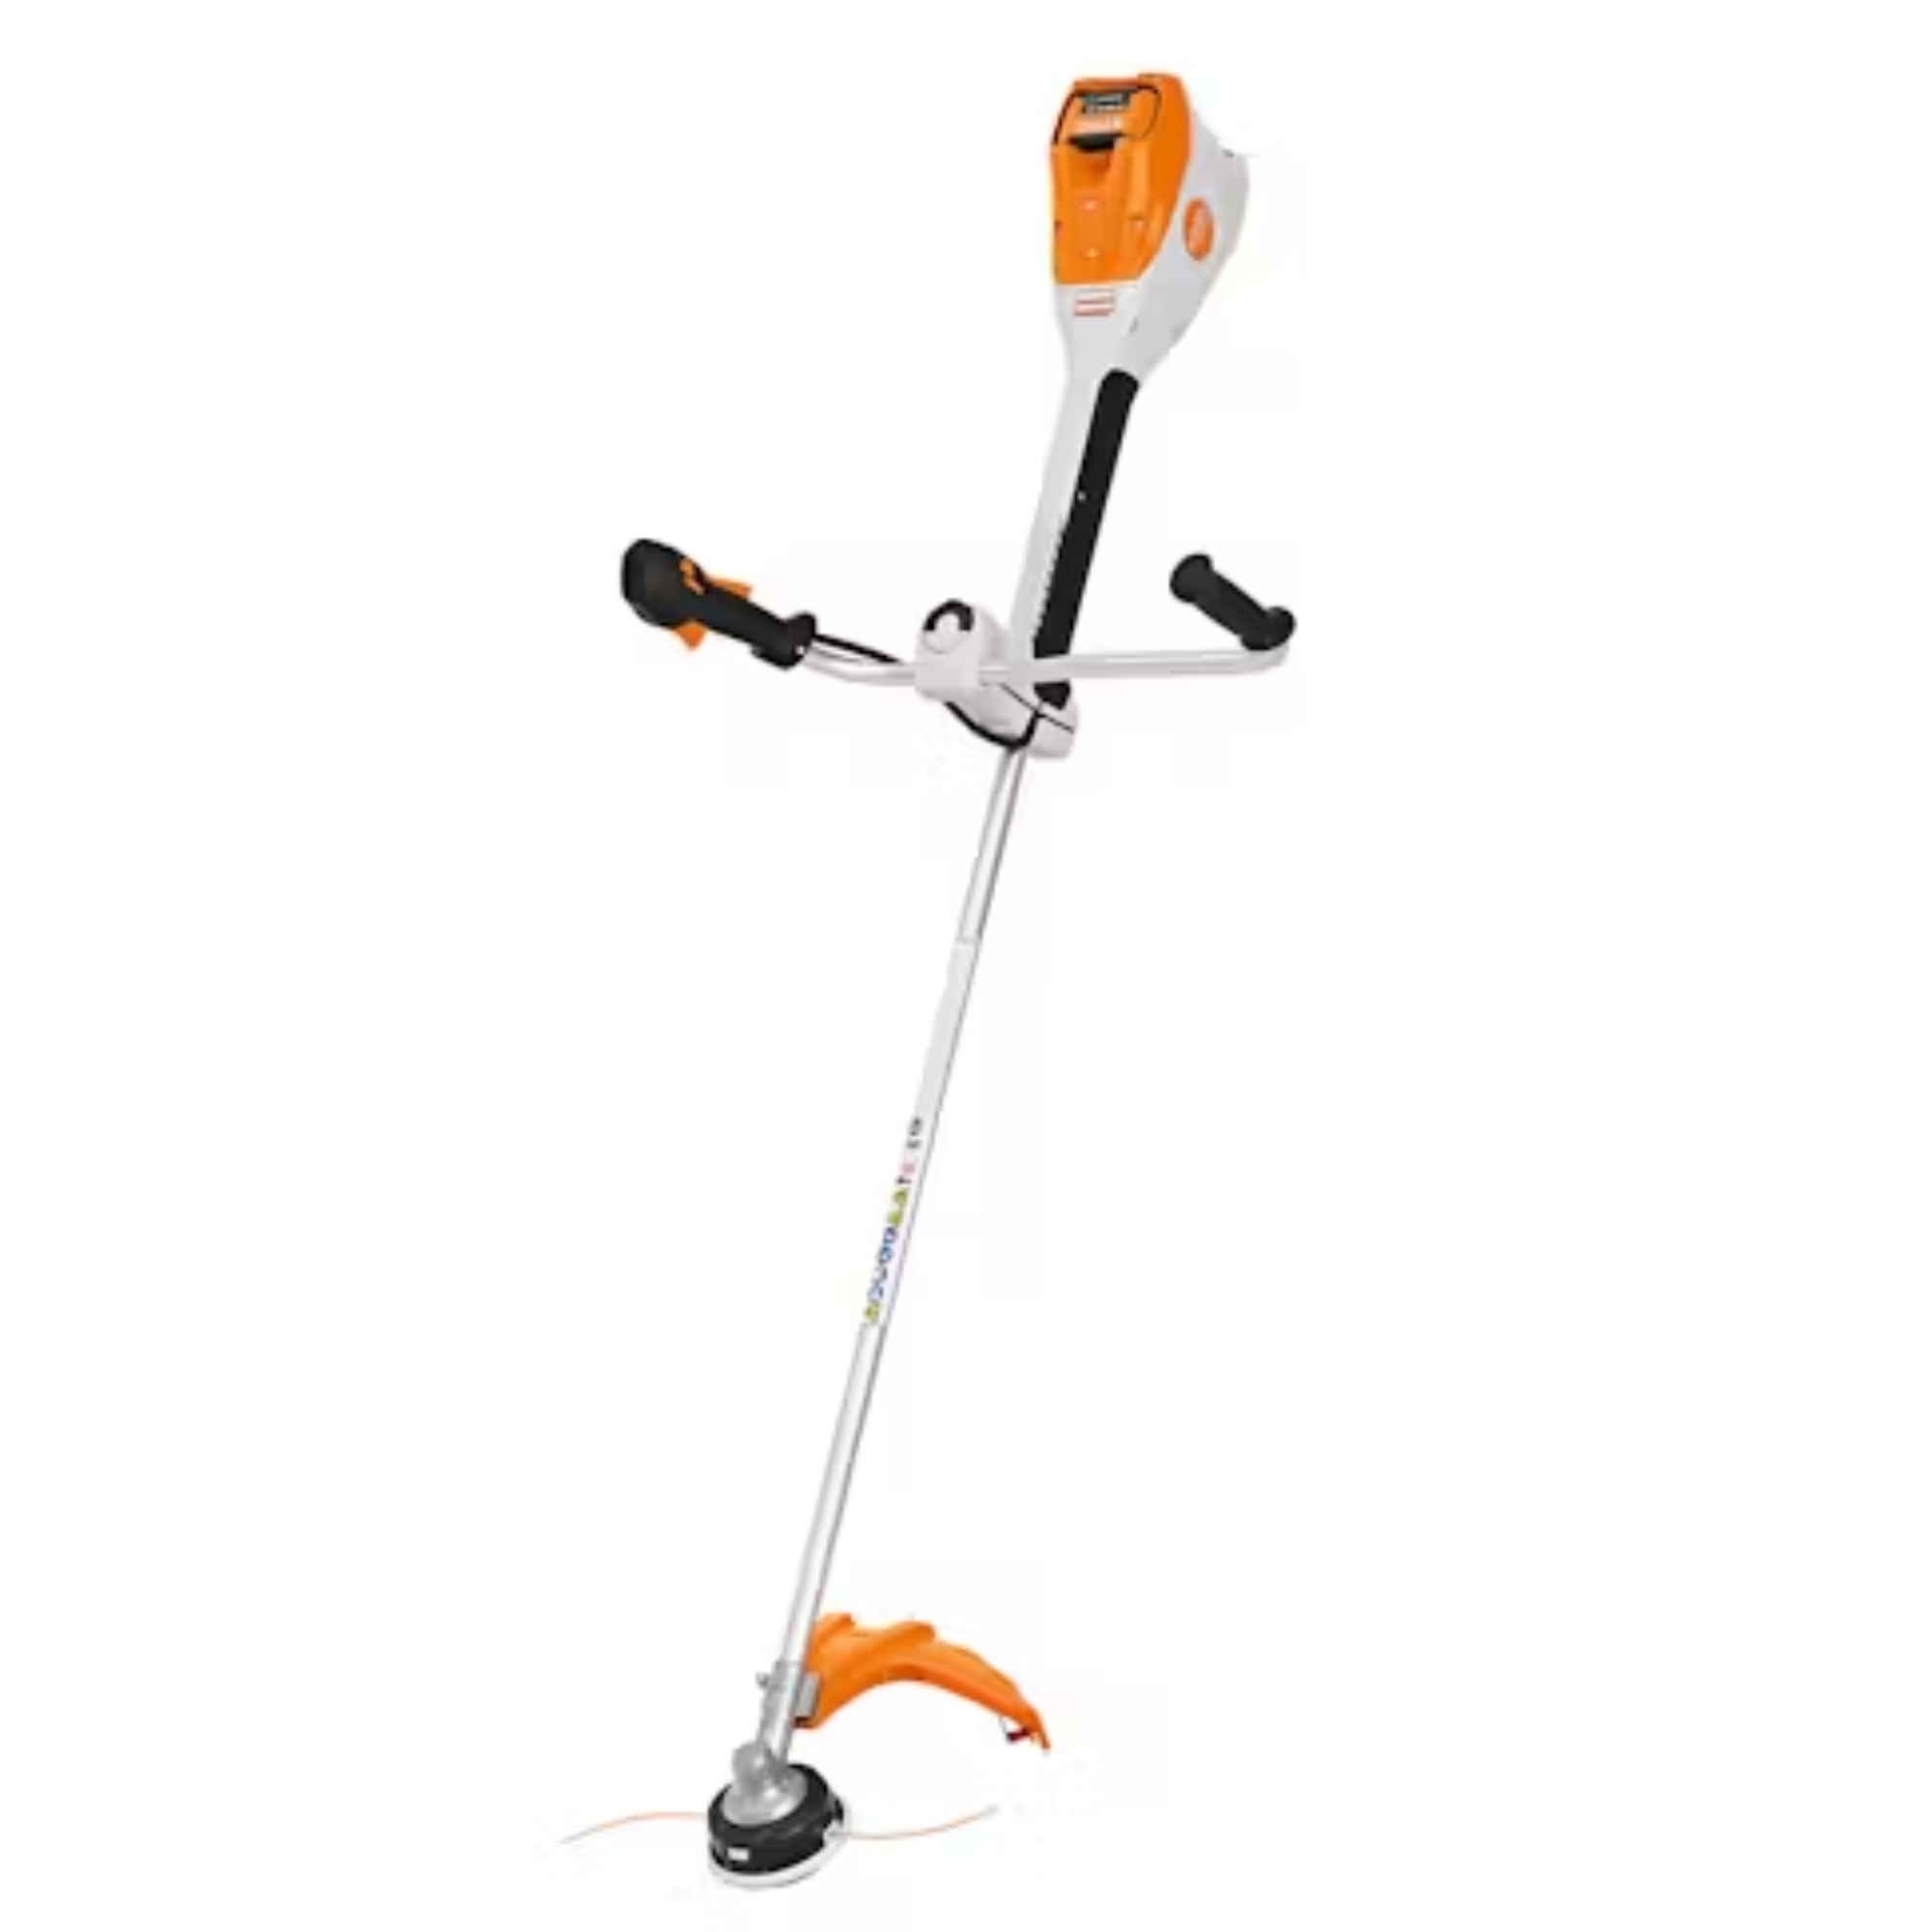 Stihl FSA 200 Battery Powered Bike Handle Trimmer | Tool Only